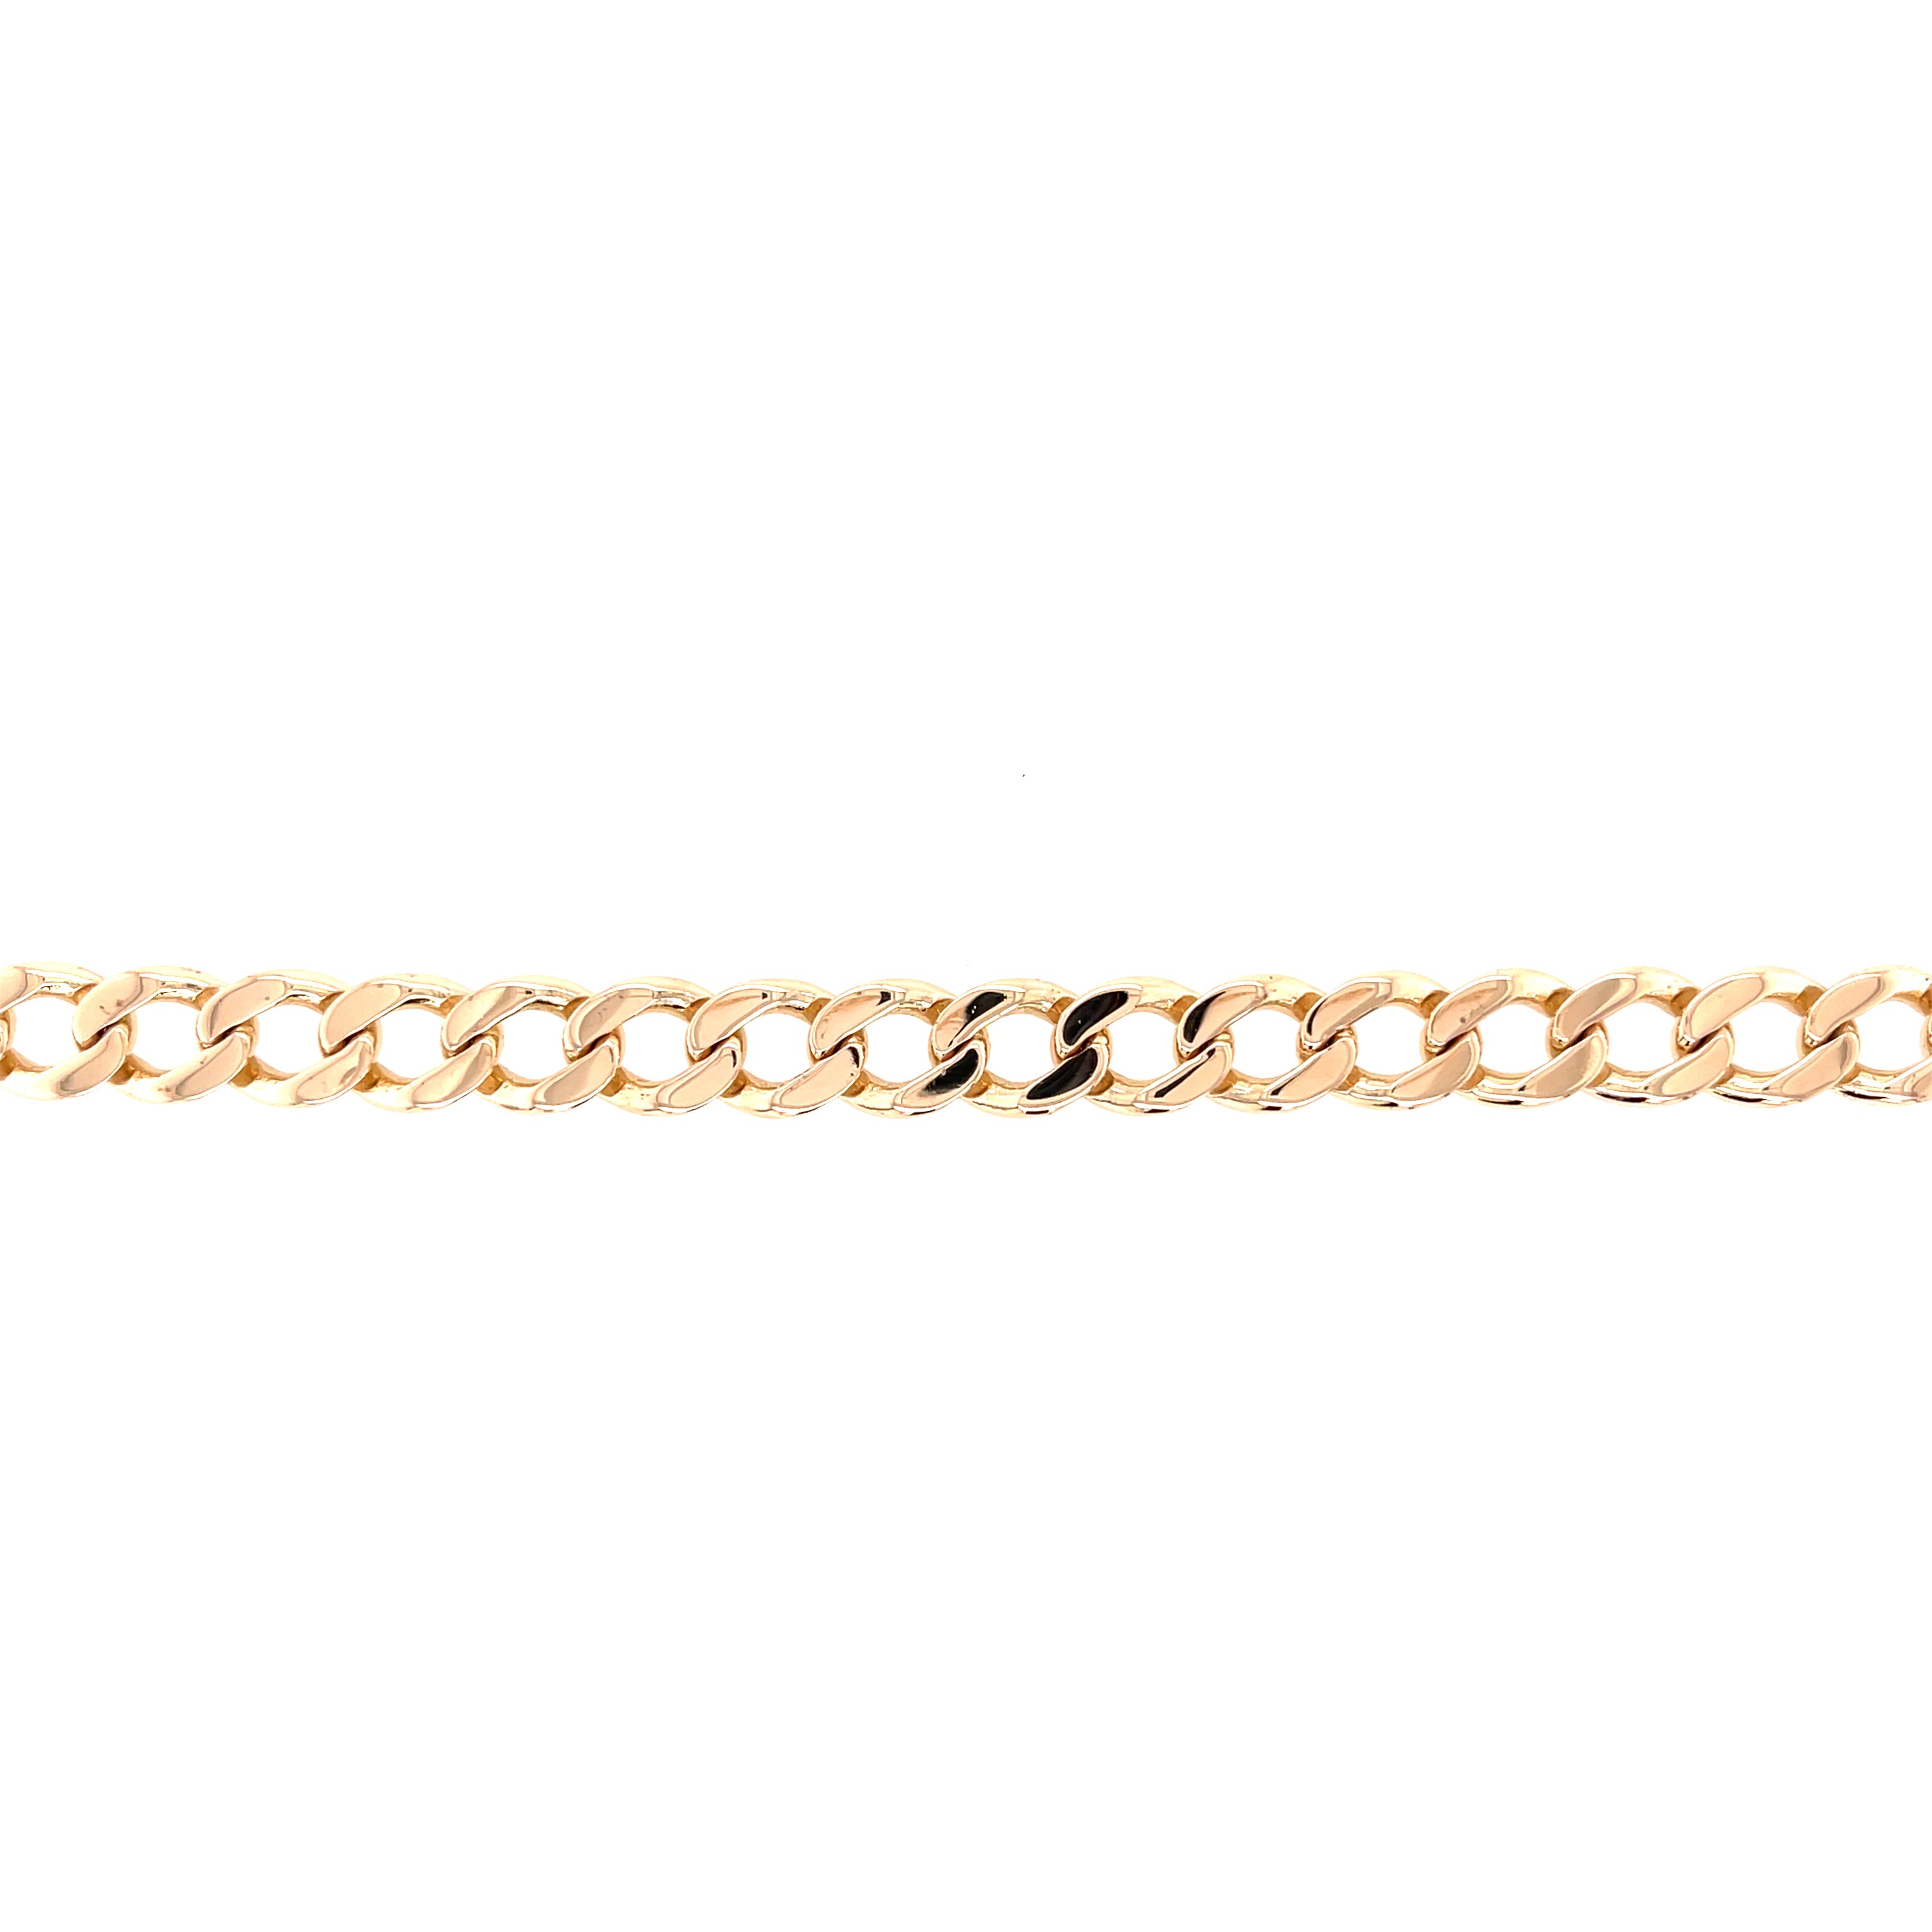 9ct Yellow Gold 9.5 Inch Curb Link Bracelet - 25.86g